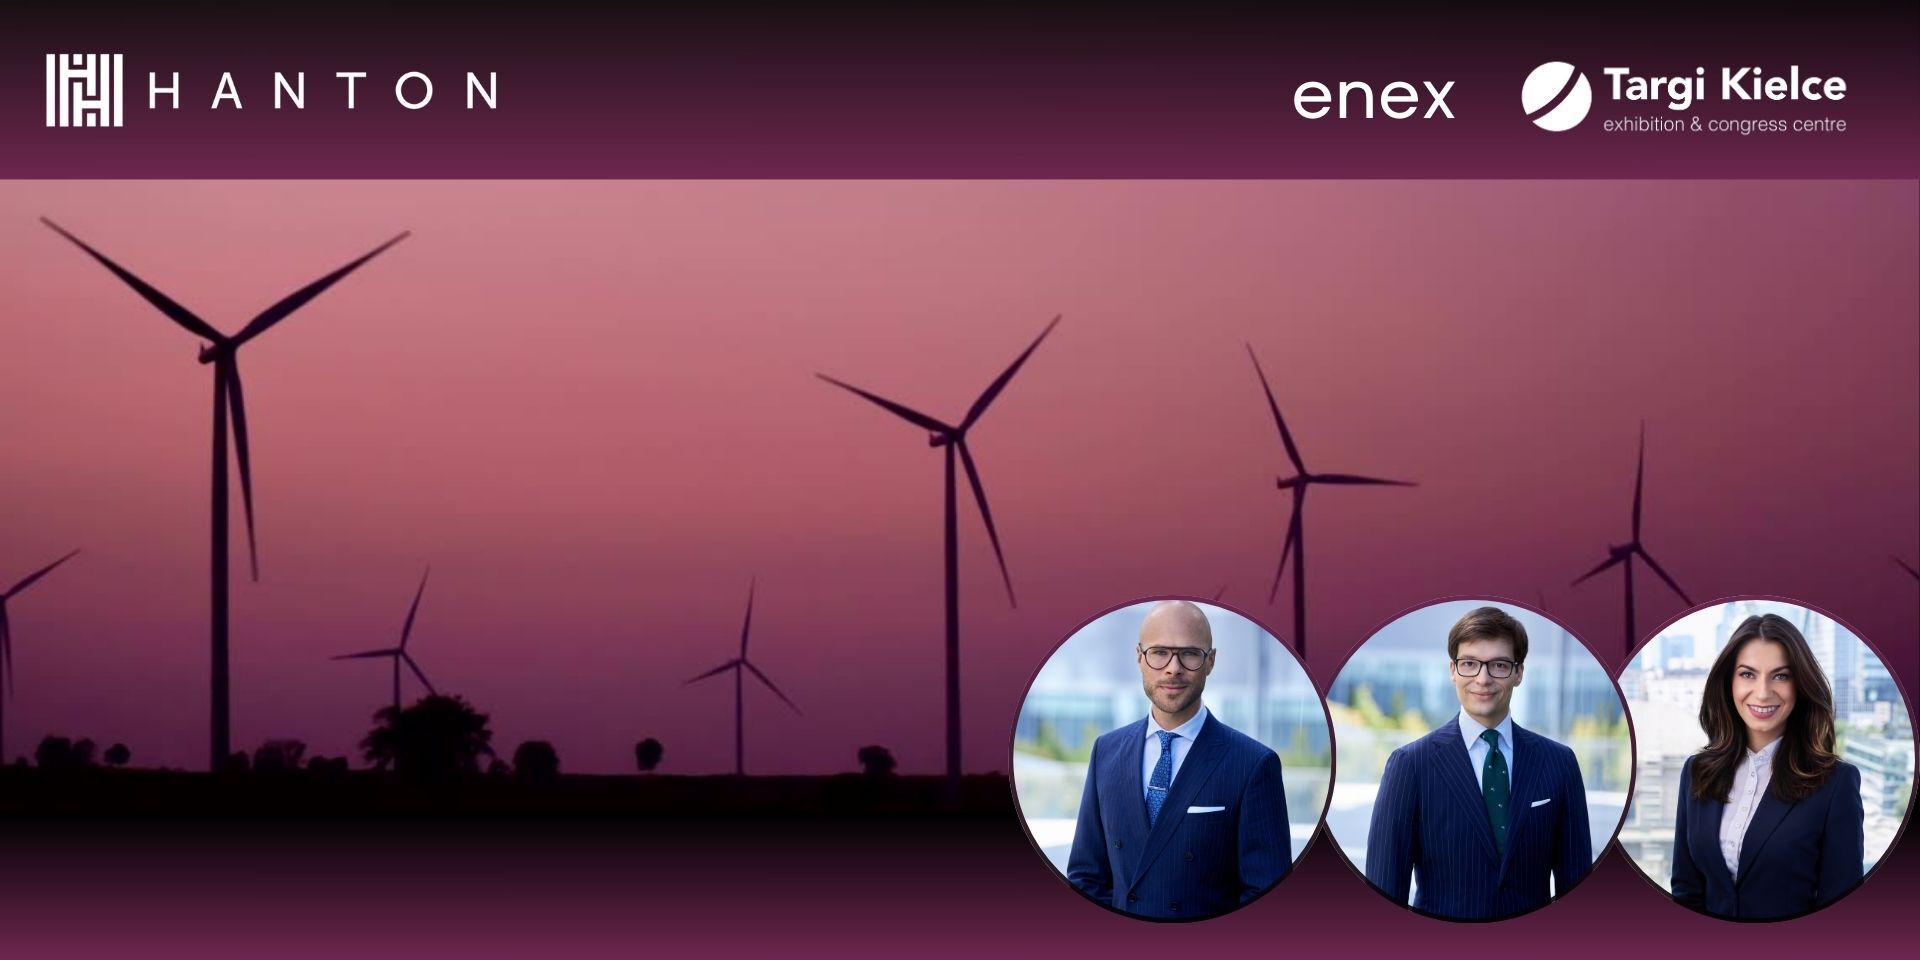 HANTON was a speaker at the Energy PL conference held as part of ENEX